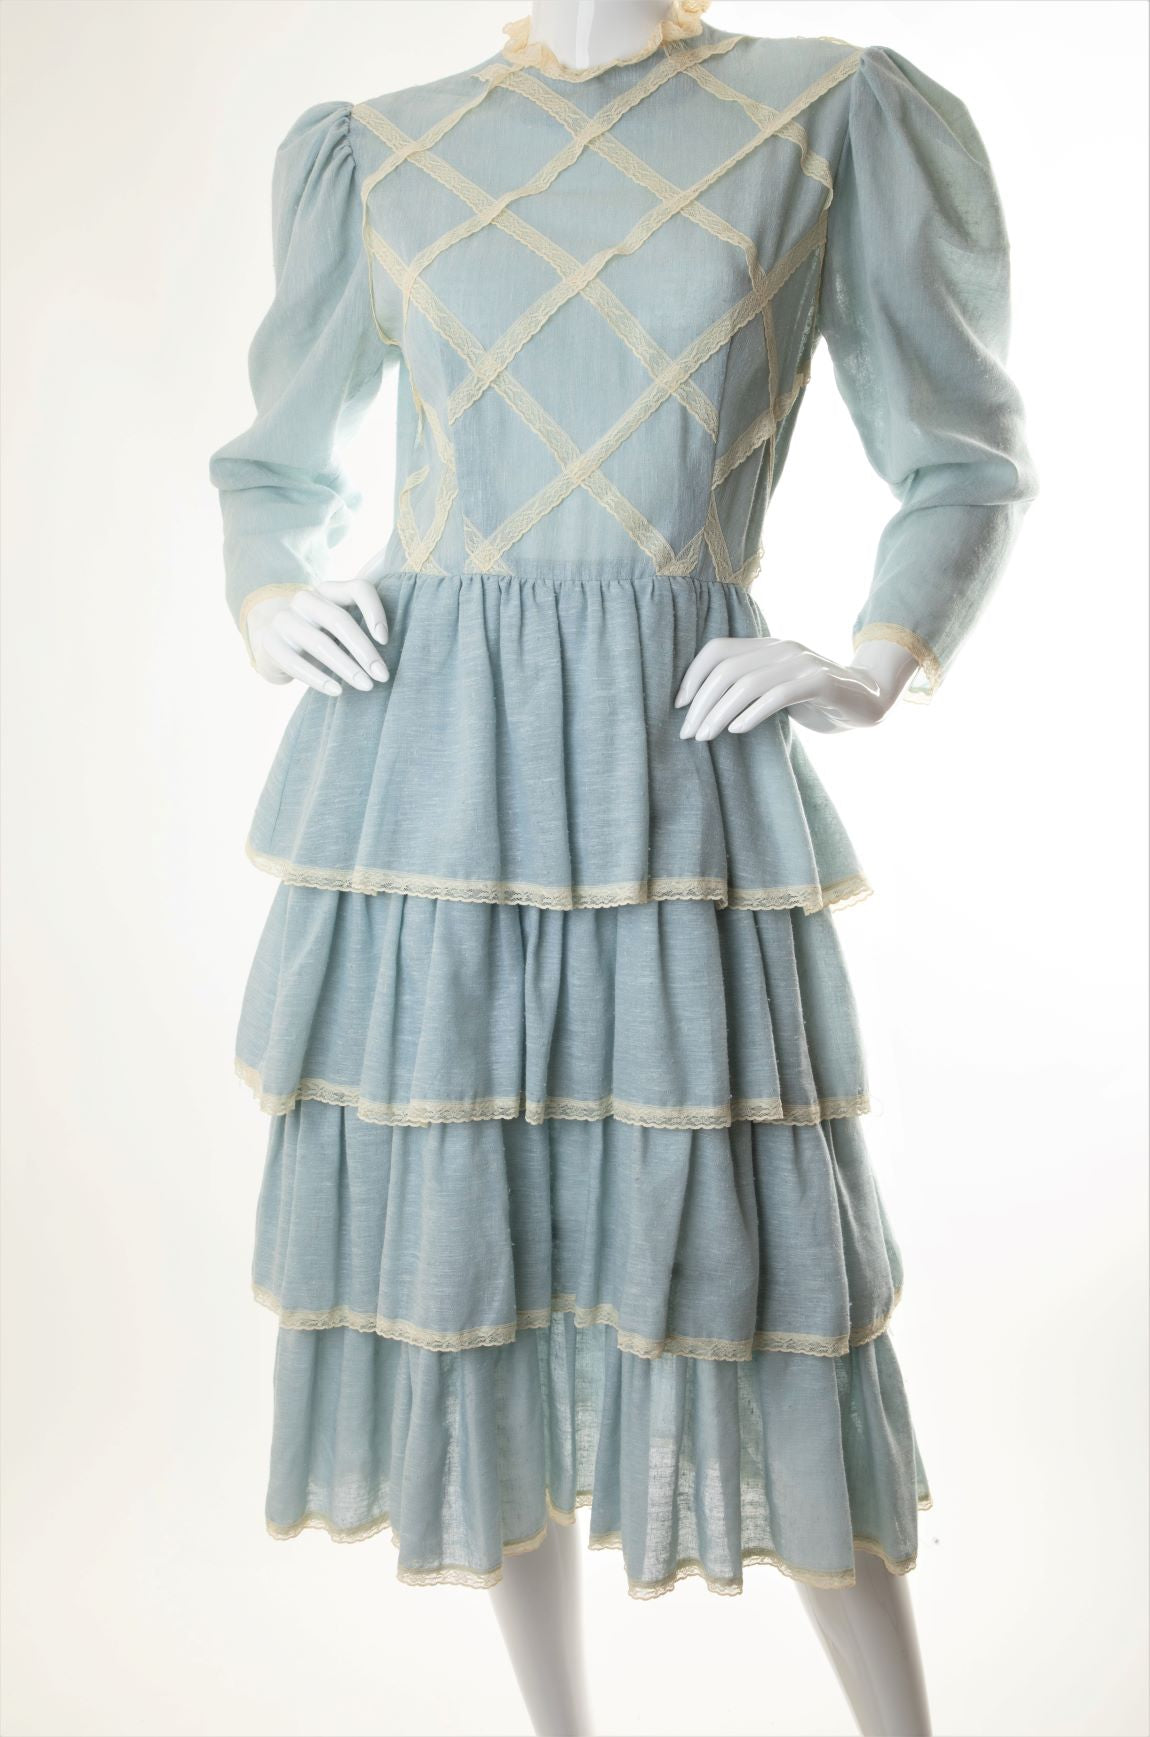 Vintage - Tiered Ruffled Dress with Lace Lattice Trim